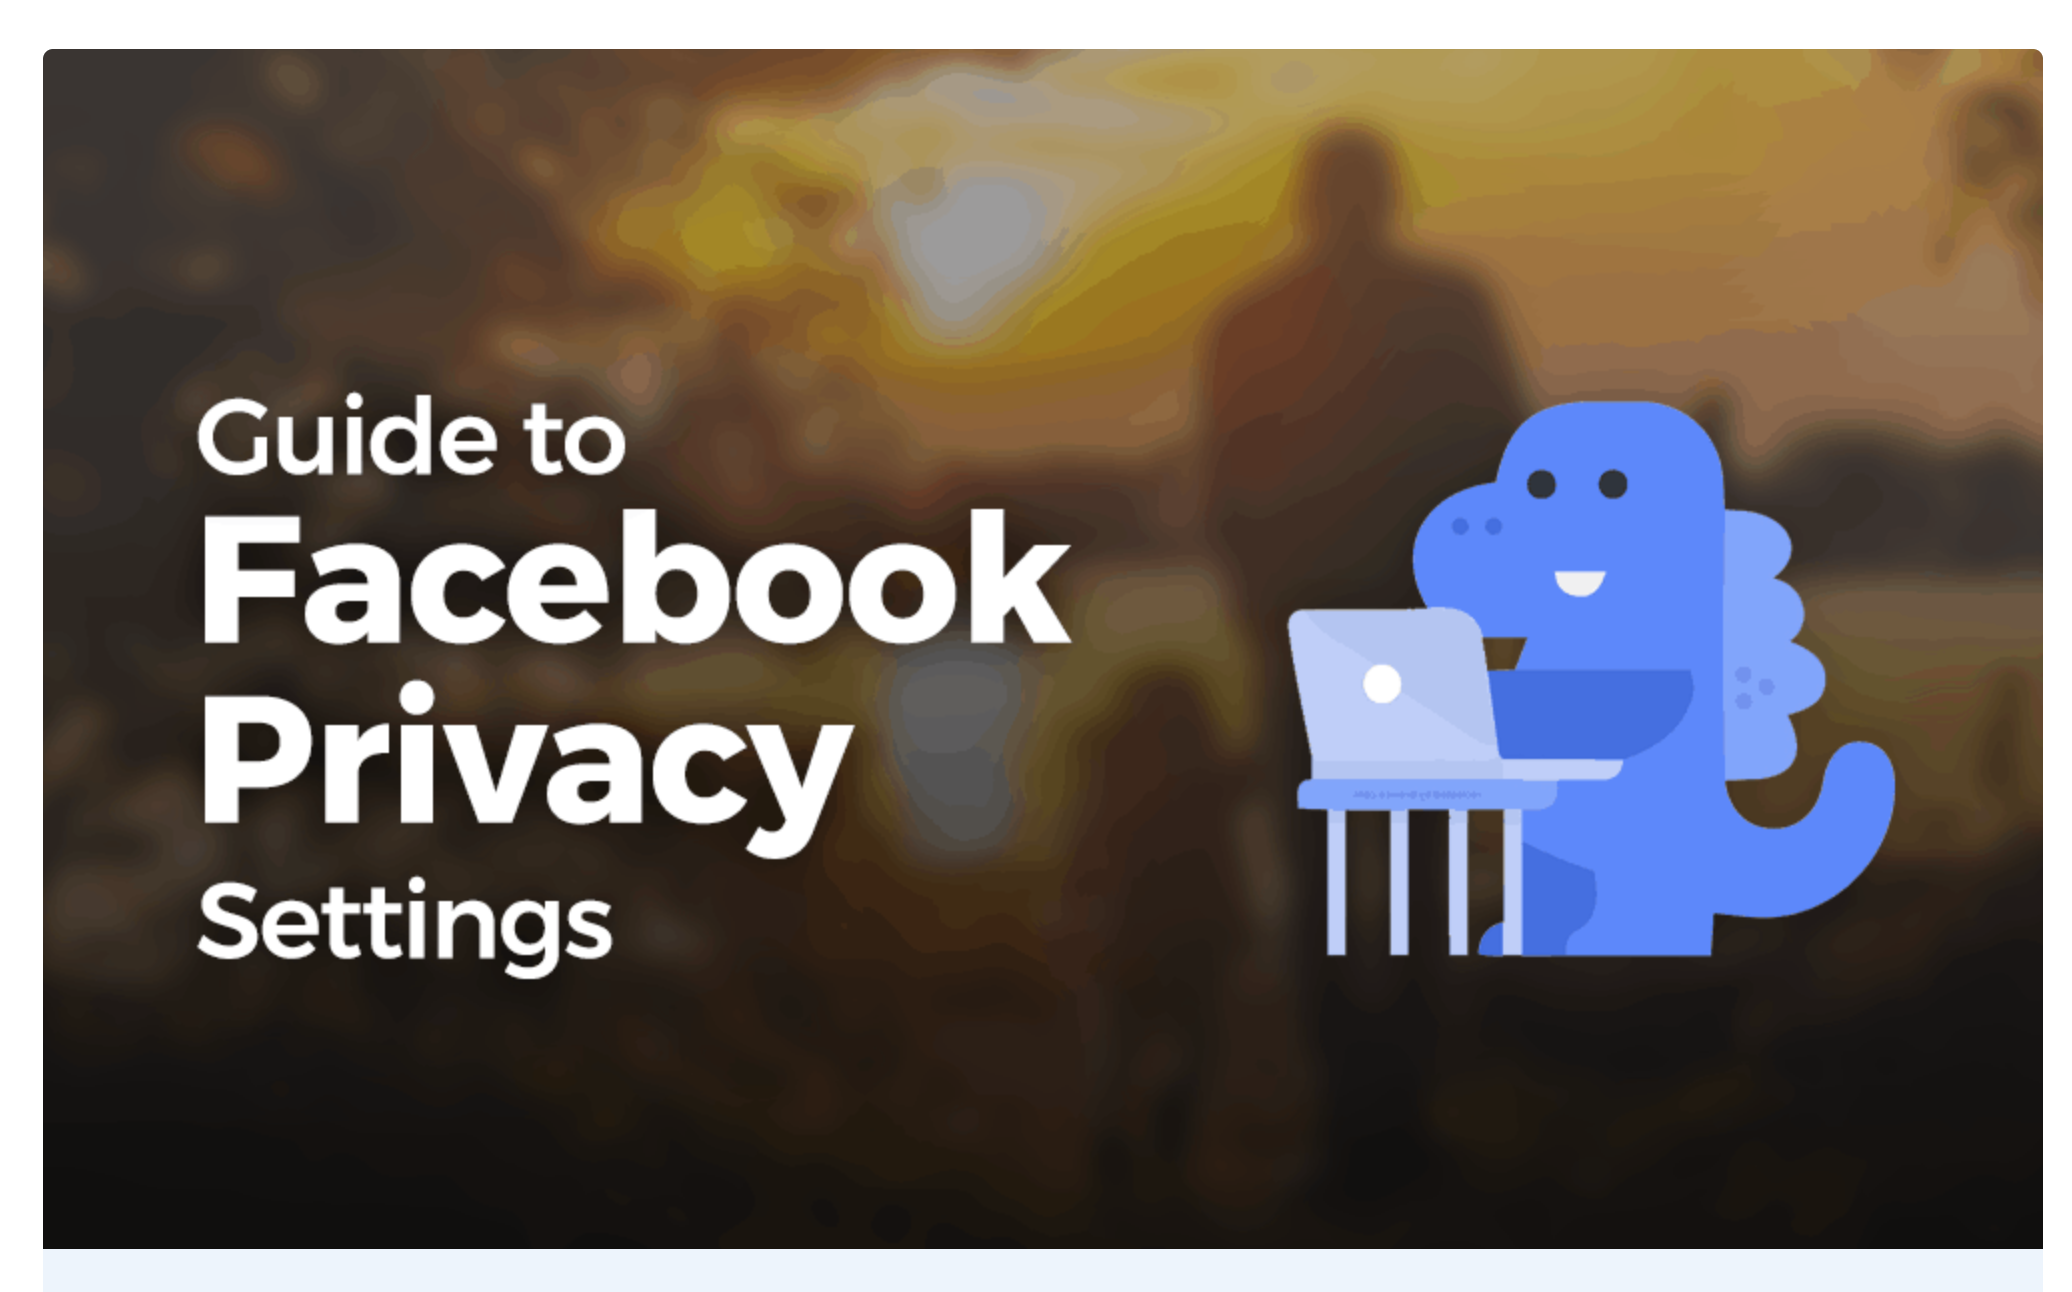 MAKING FACEBOOK PRIVATE - protect your personal information